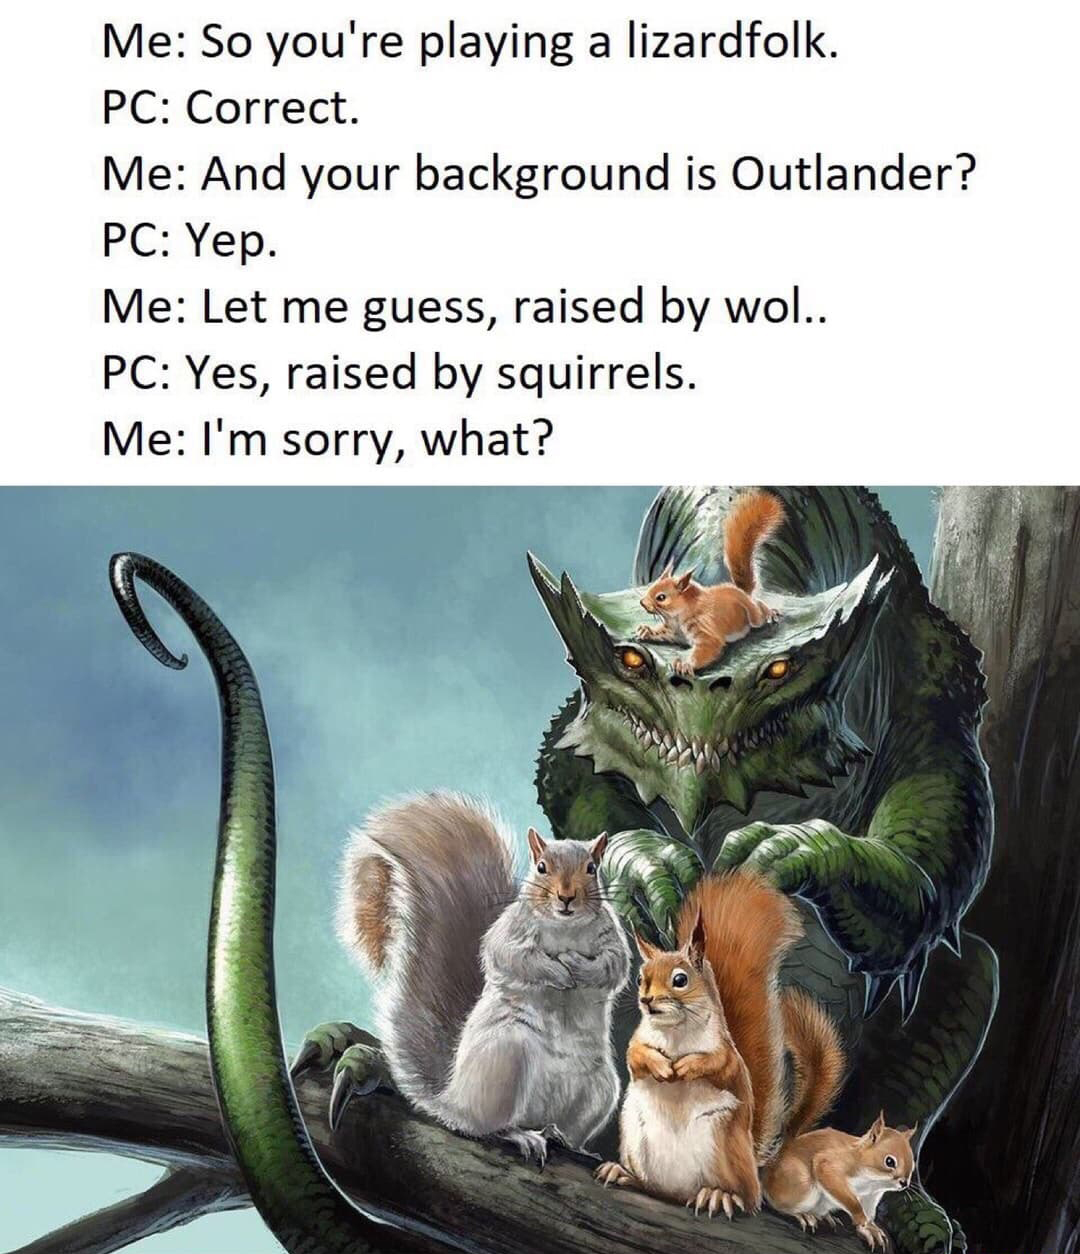 dnd lizardfolk memes - Me So you're playing a lizardfolk. Pc Correct. Me And your background is Outlander? Pc Yep. Me Let me guess, raised by wol.. Pc Yes, raised by squirrels. Me I'm sorry, what?